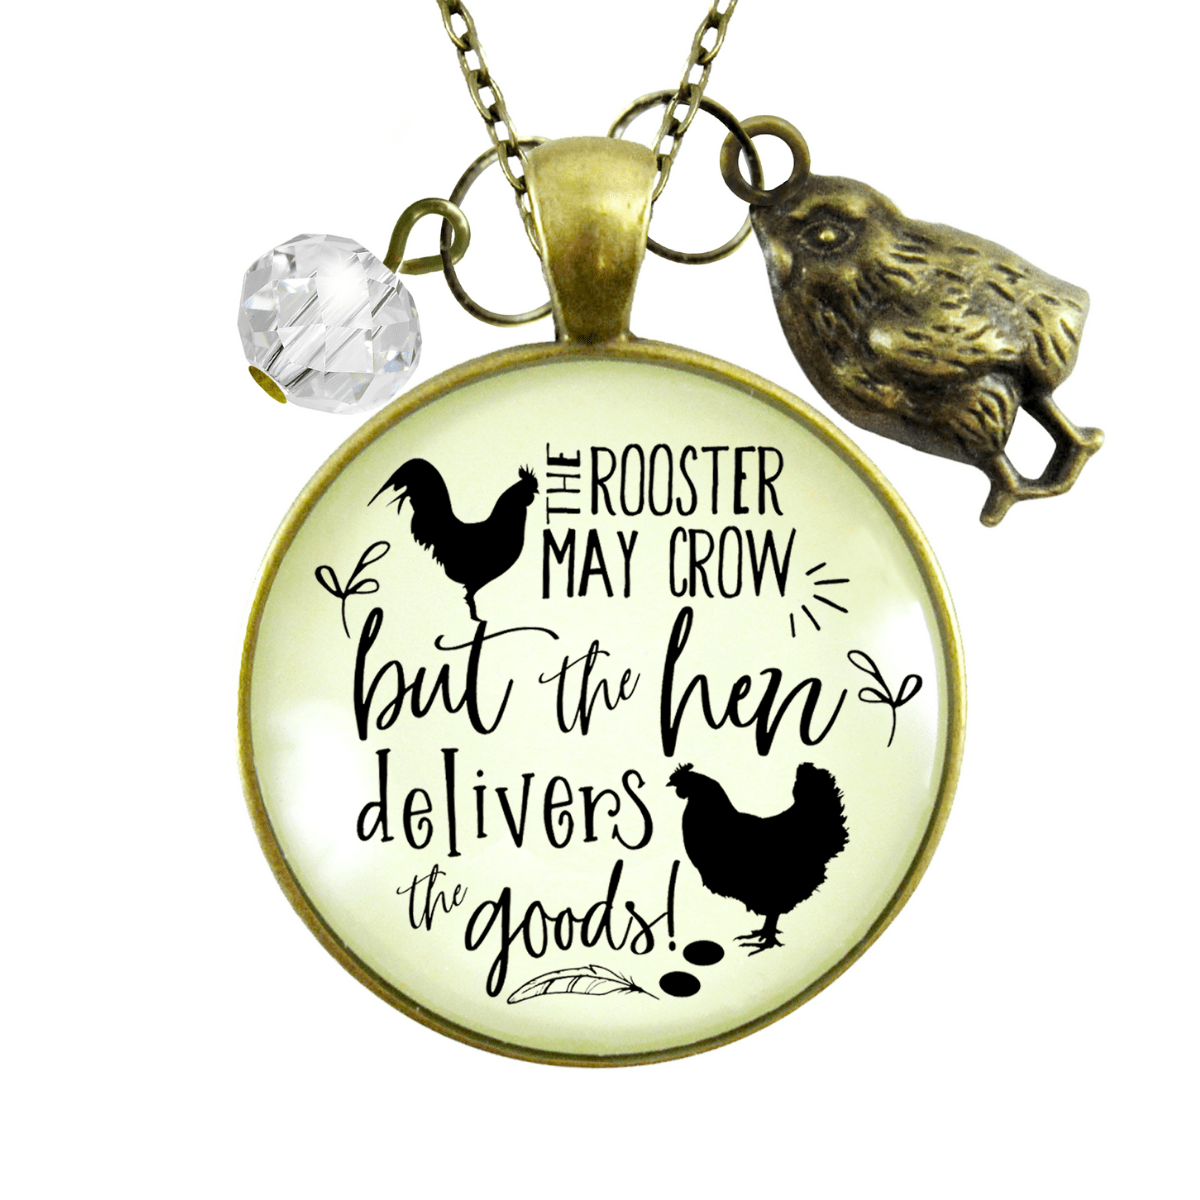 Gutsy Goodness Chicken Necklace Rooster May Crow Hen Delivers Jewelry - Gutsy Goodness;Chicken Necklace Rooster May Crow Hen Delivers Jewelry - Gutsy Goodness Handmade Jewelry Gifts